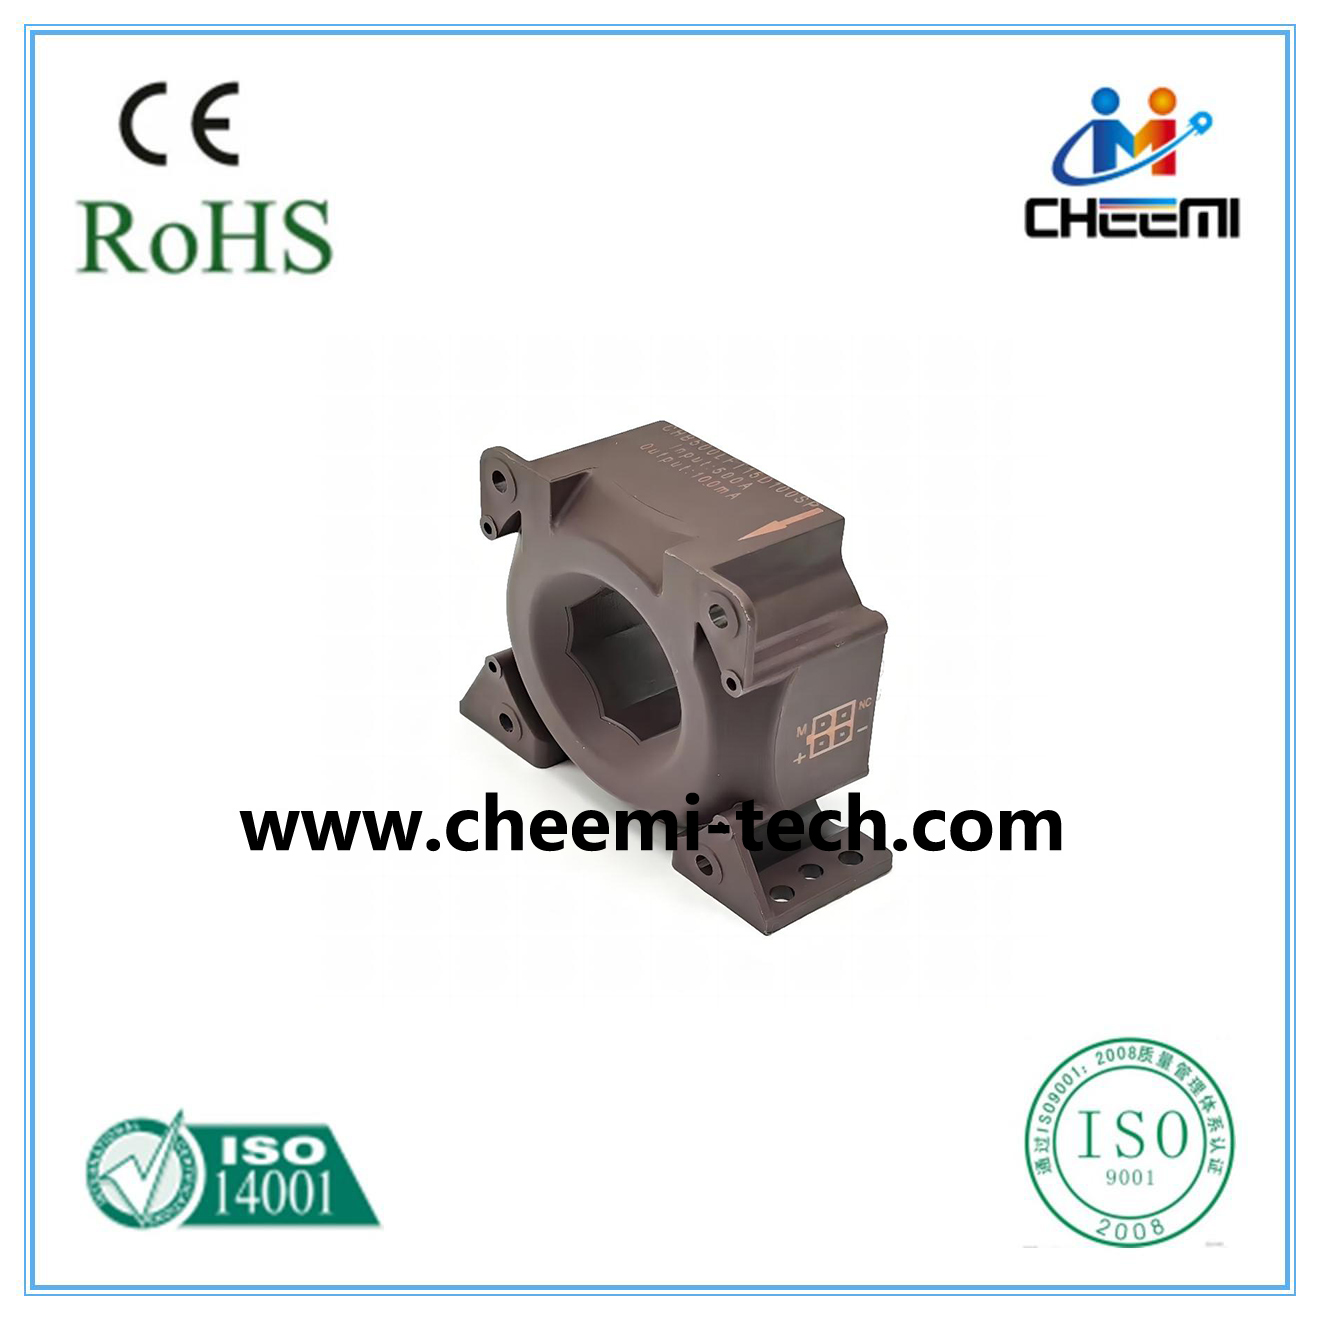 High-Accuracy-Current-Sensors-Transducers-CHB-LFT15D100S-Applied-In-railway